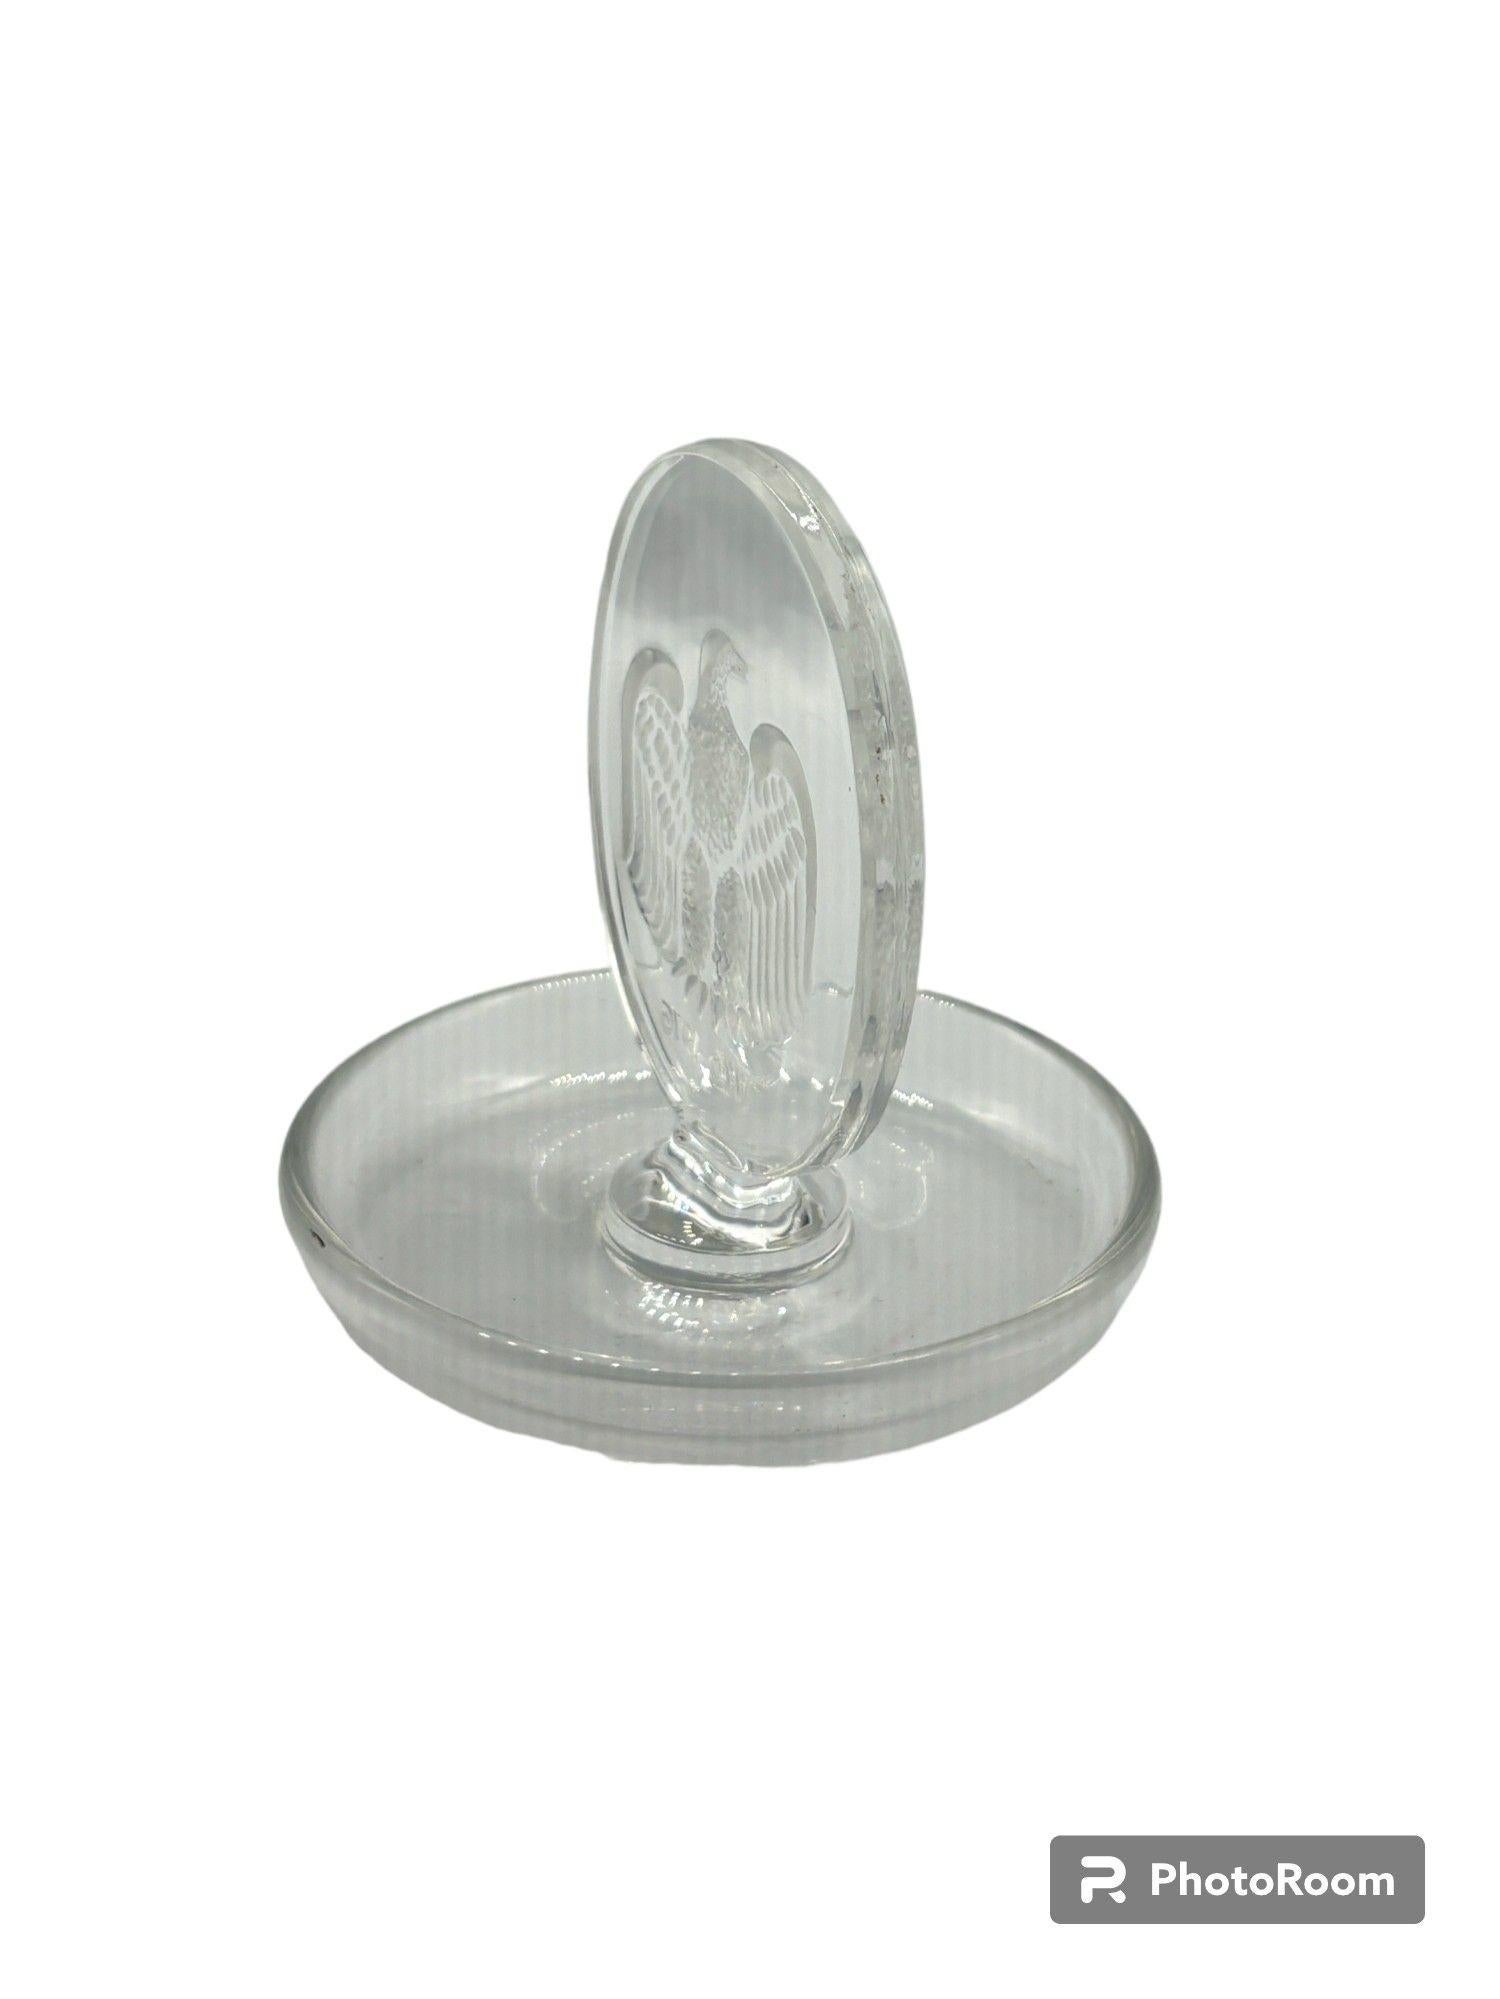 Vintage Lalique Crystal Pin Ring Dish Tray In Excellent Condition For Sale In Van Nuys, CA